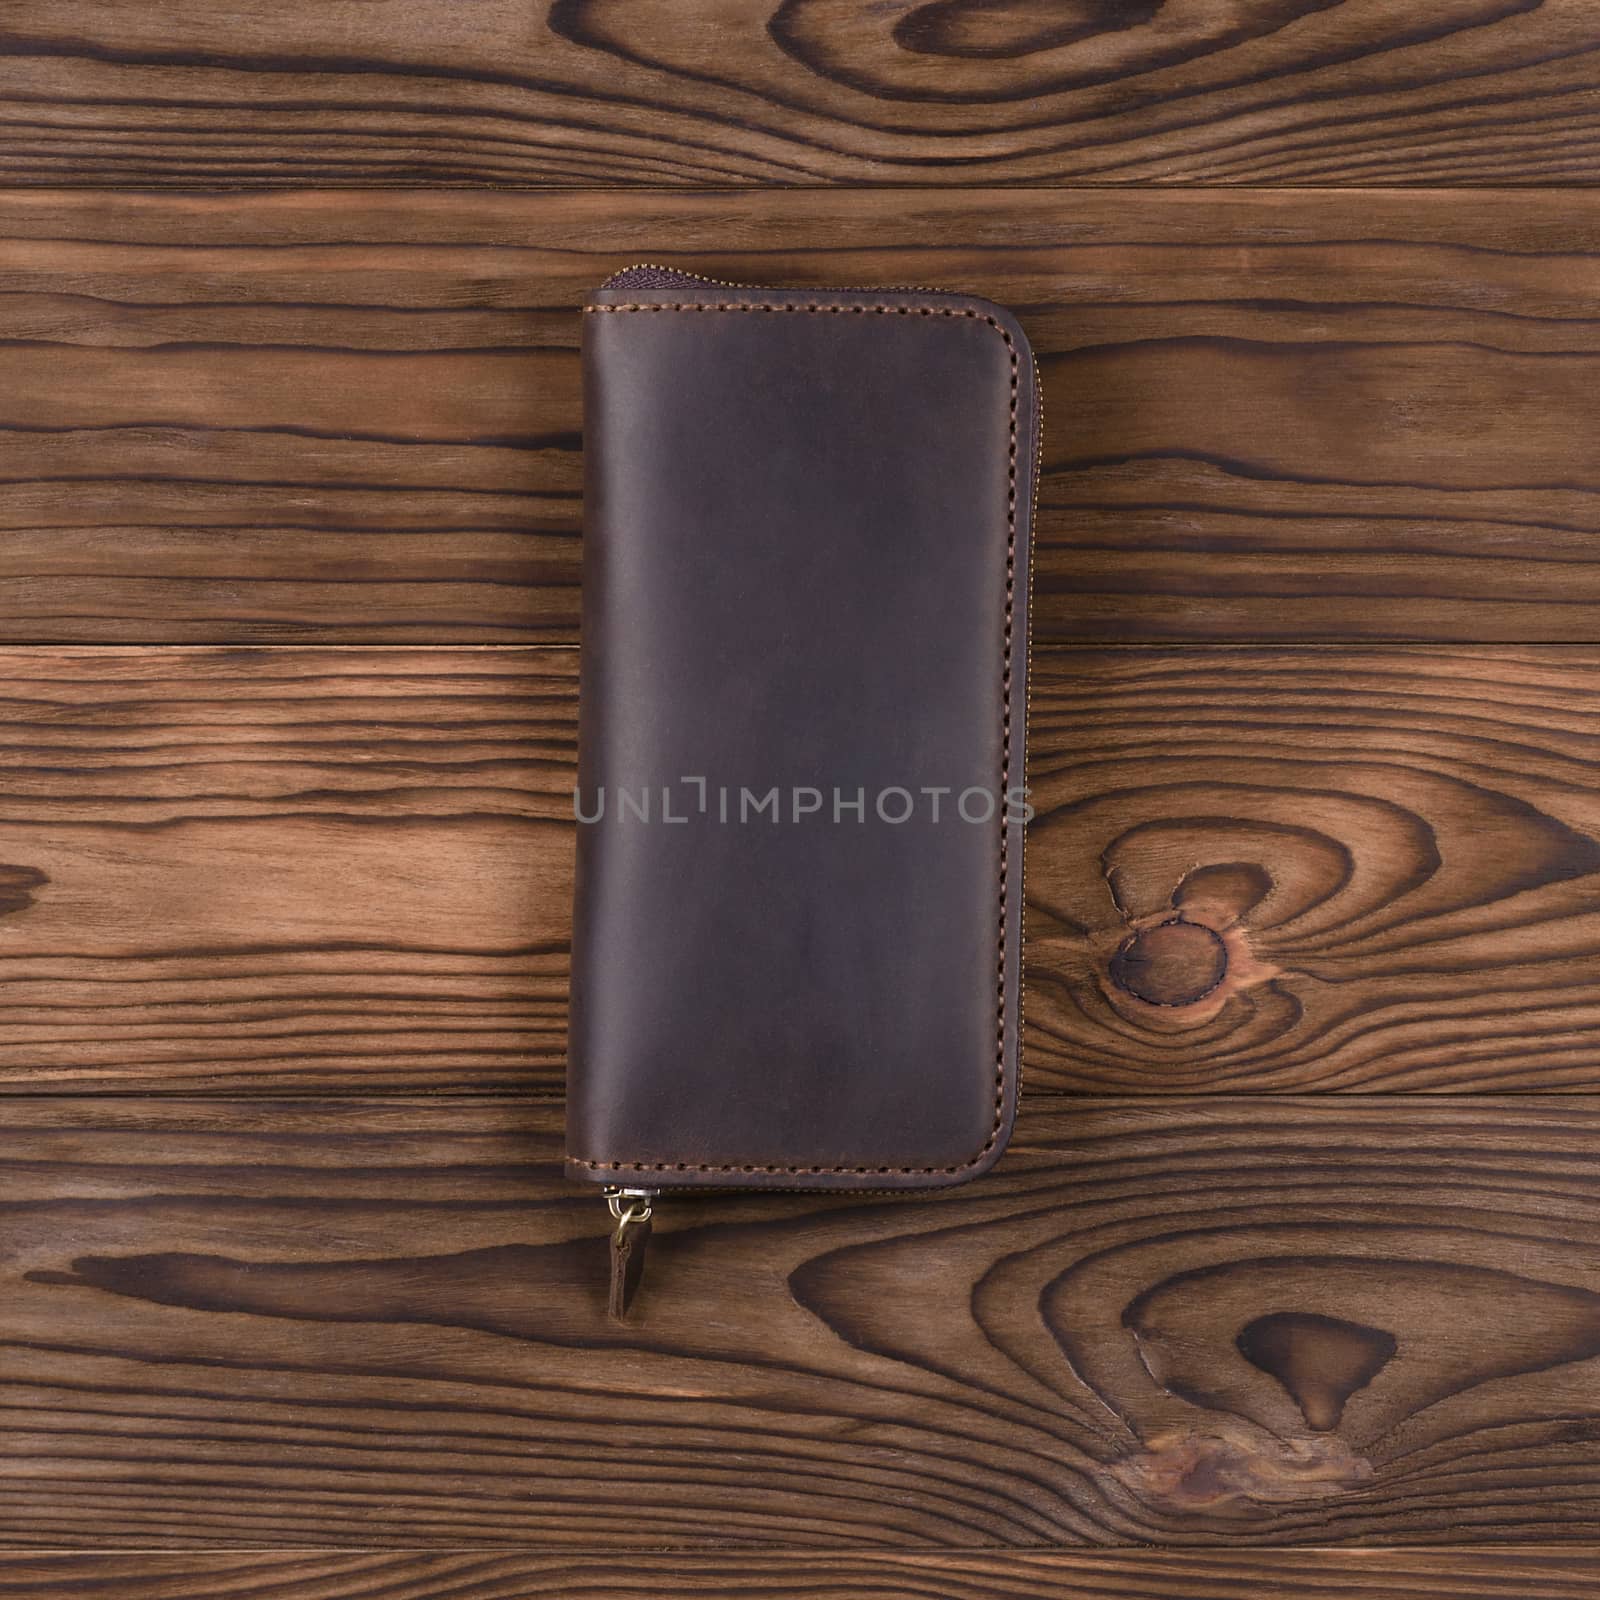 Brown color handmade leather porte-monnaie on wooden textured background.  Up to down view. Stock photo of luxury accessories.